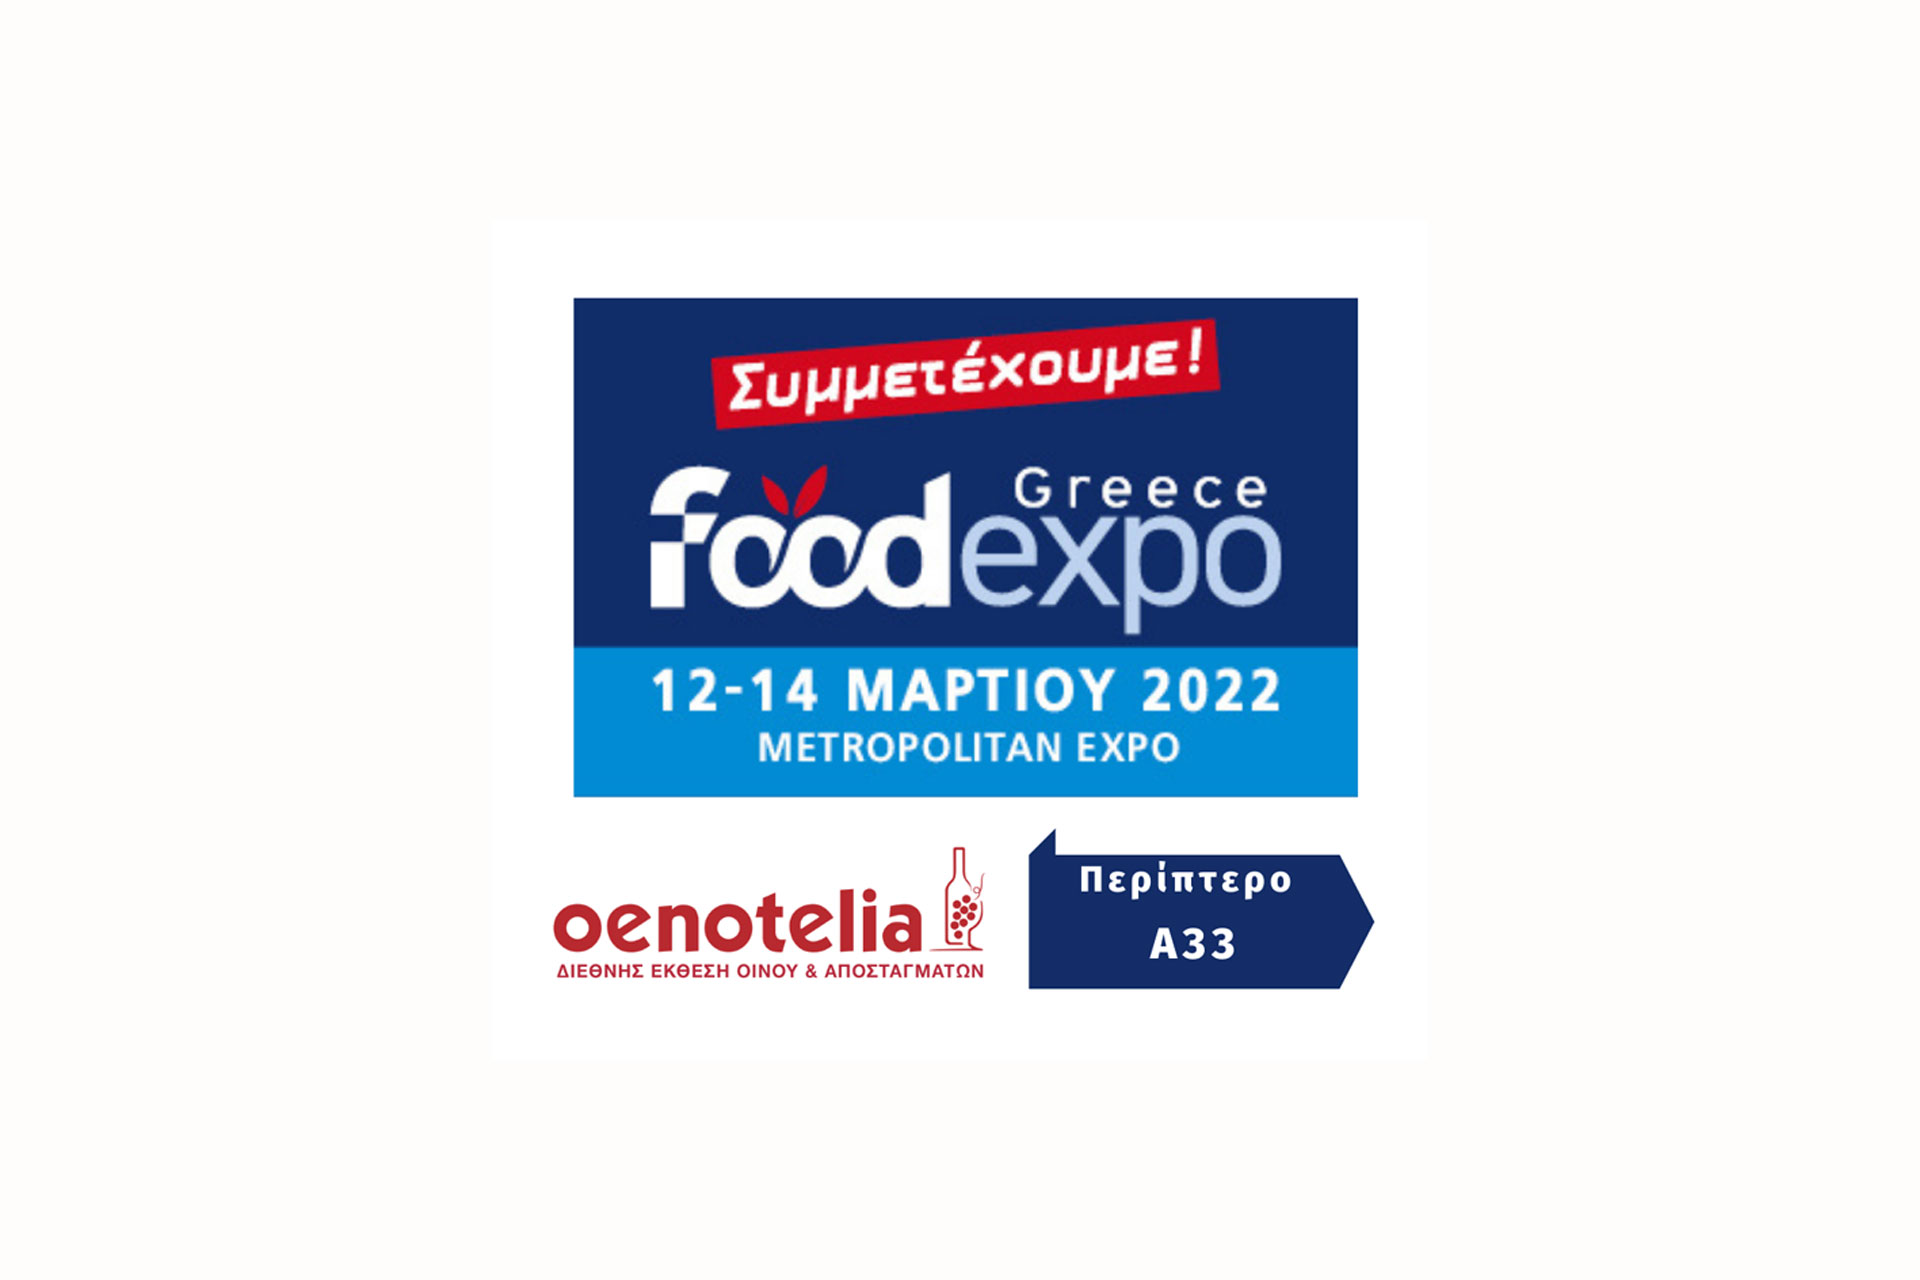 We participate in the Food Expo - Oenotelia on March 12-14 Stand A33